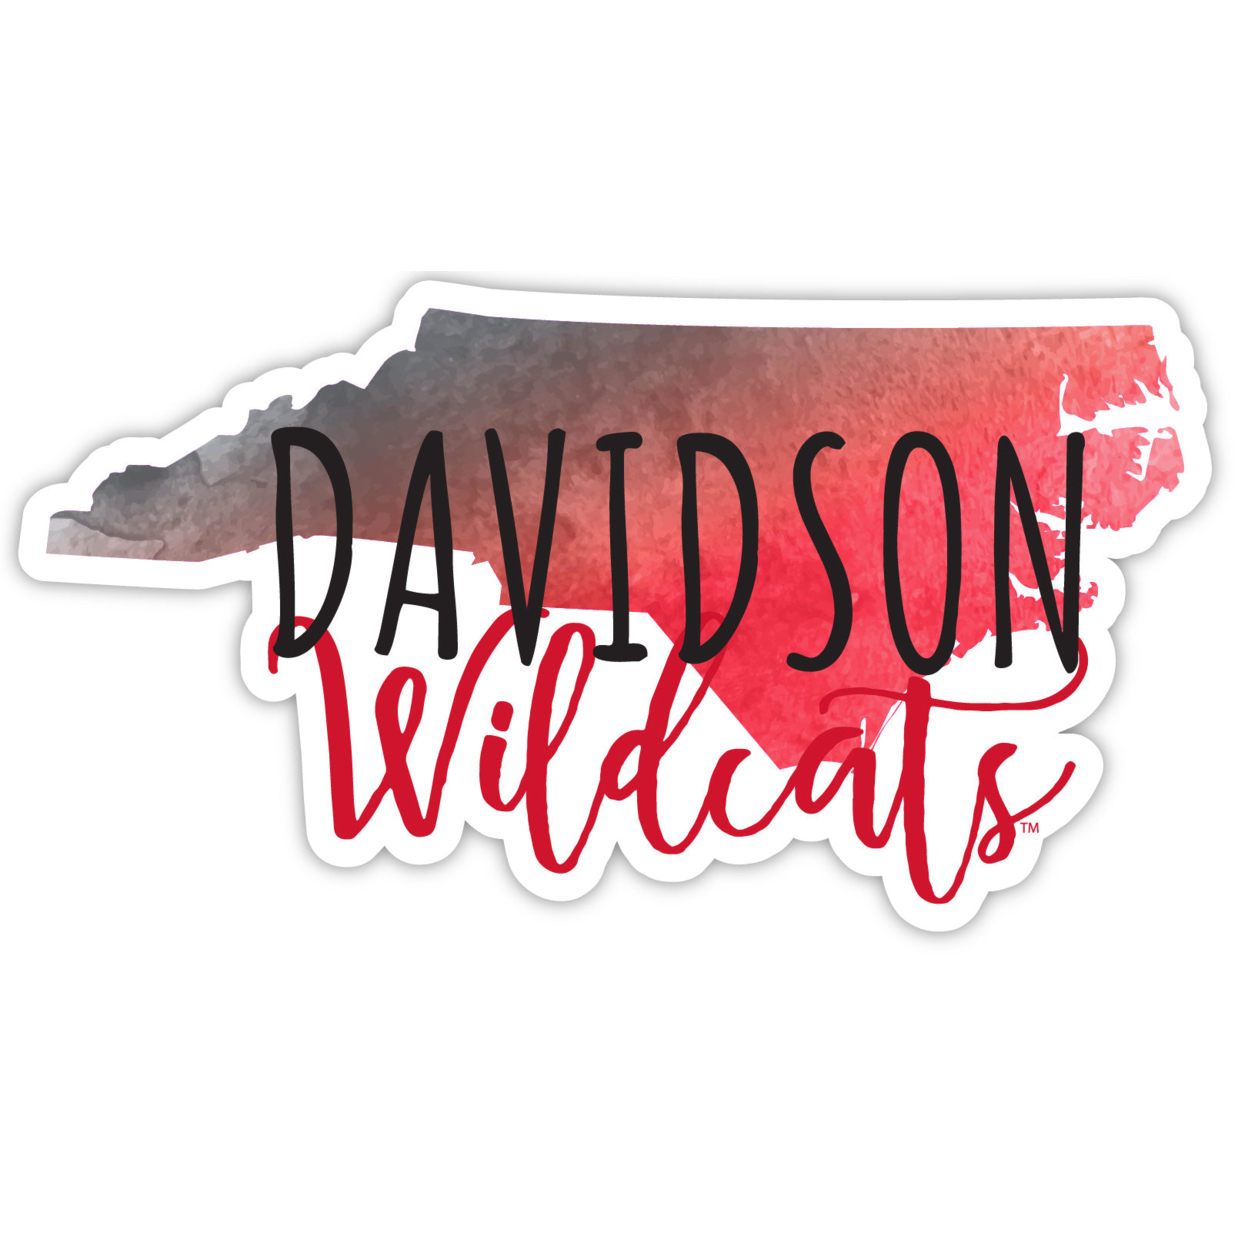 Davidson College Watercolor State Die Cut Decal 2-Inch